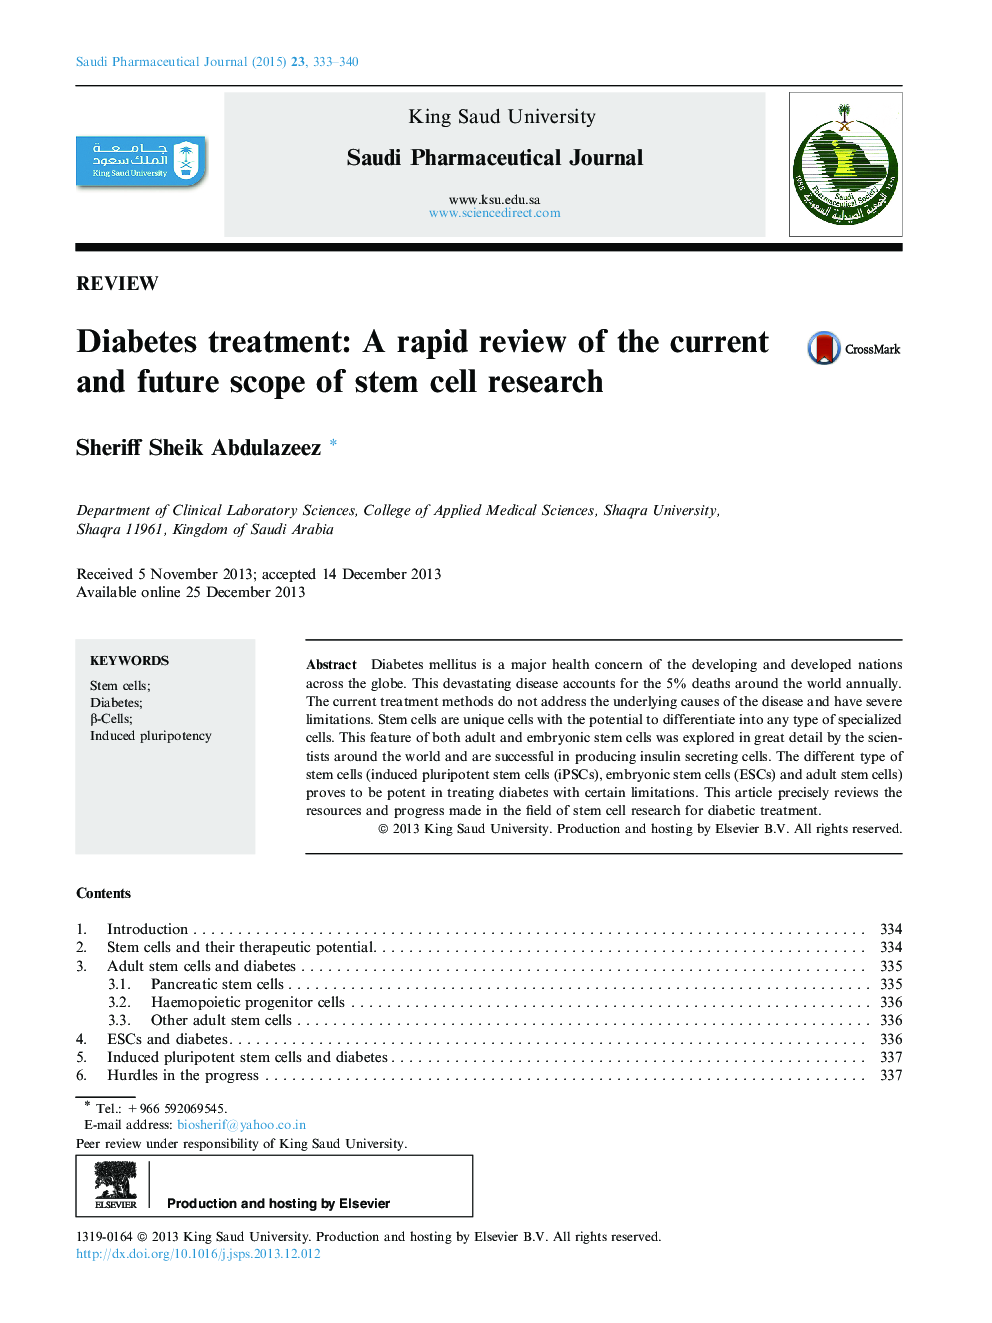 Diabetes treatment: A rapid review of the current and future scope of stem cell research 